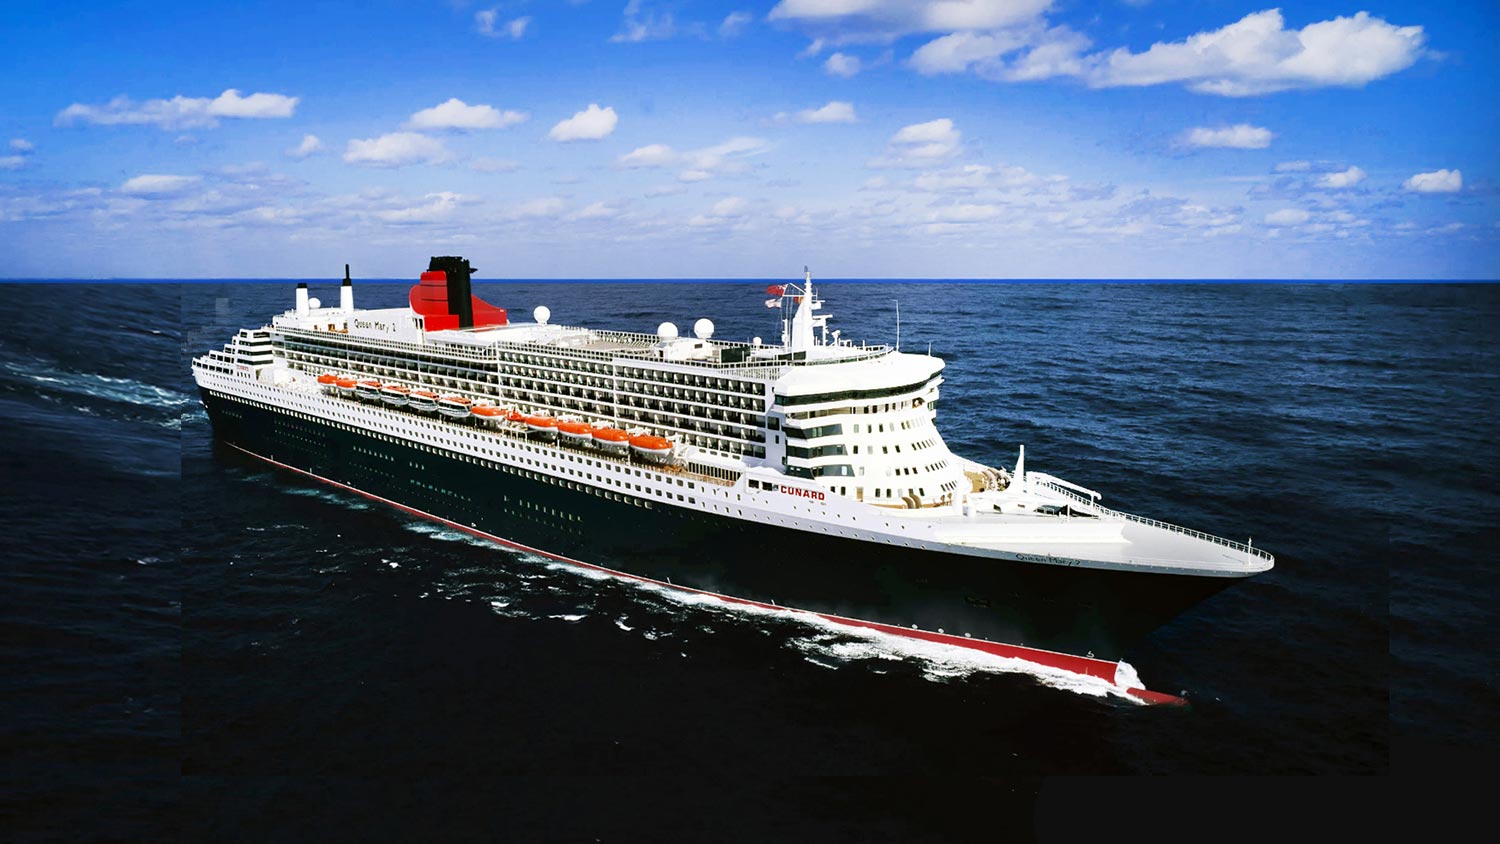 Queen Mary 2 at sea